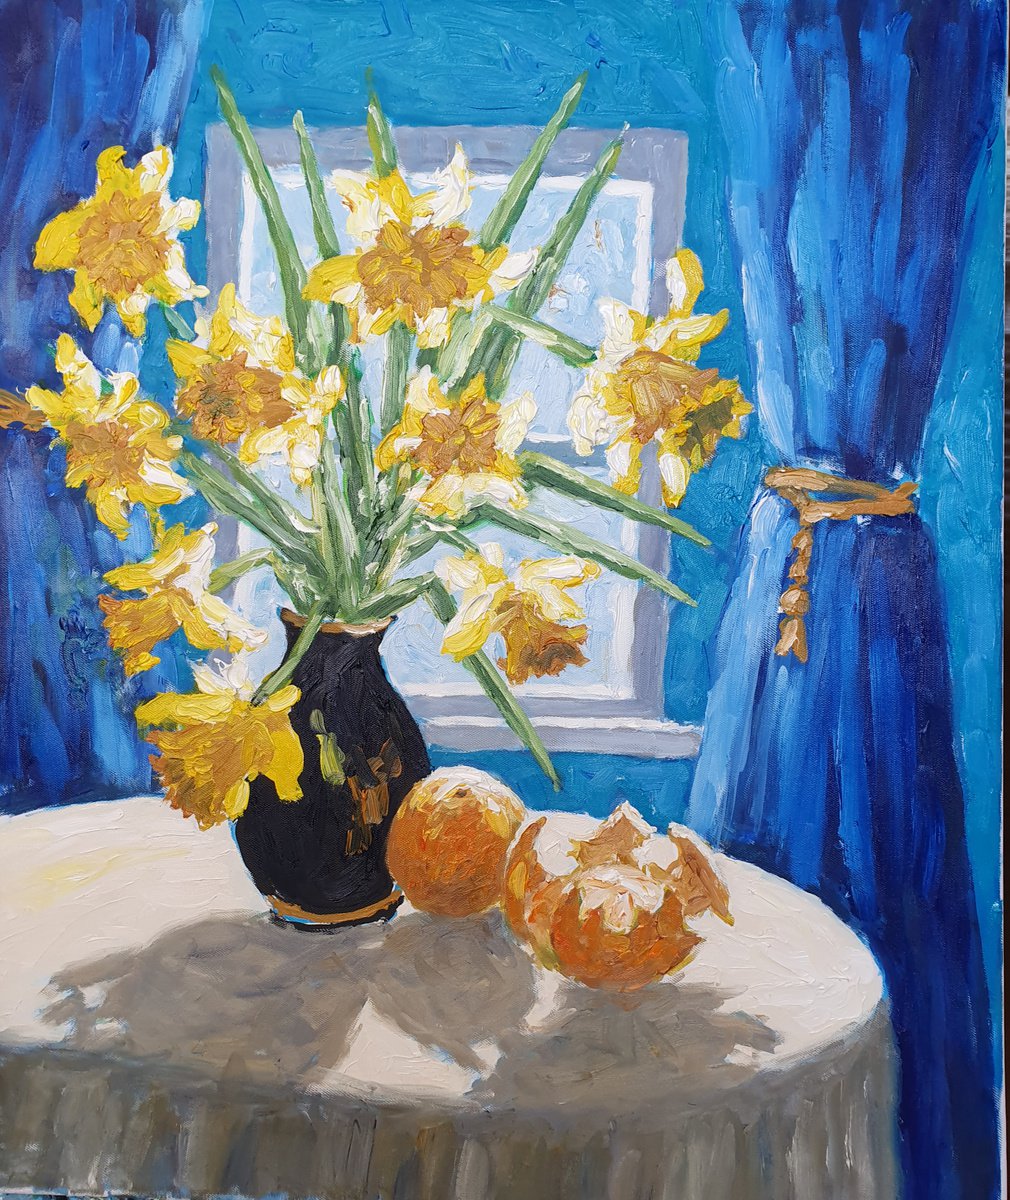 Daffodils by the window, backlit by Colin Ross Jack